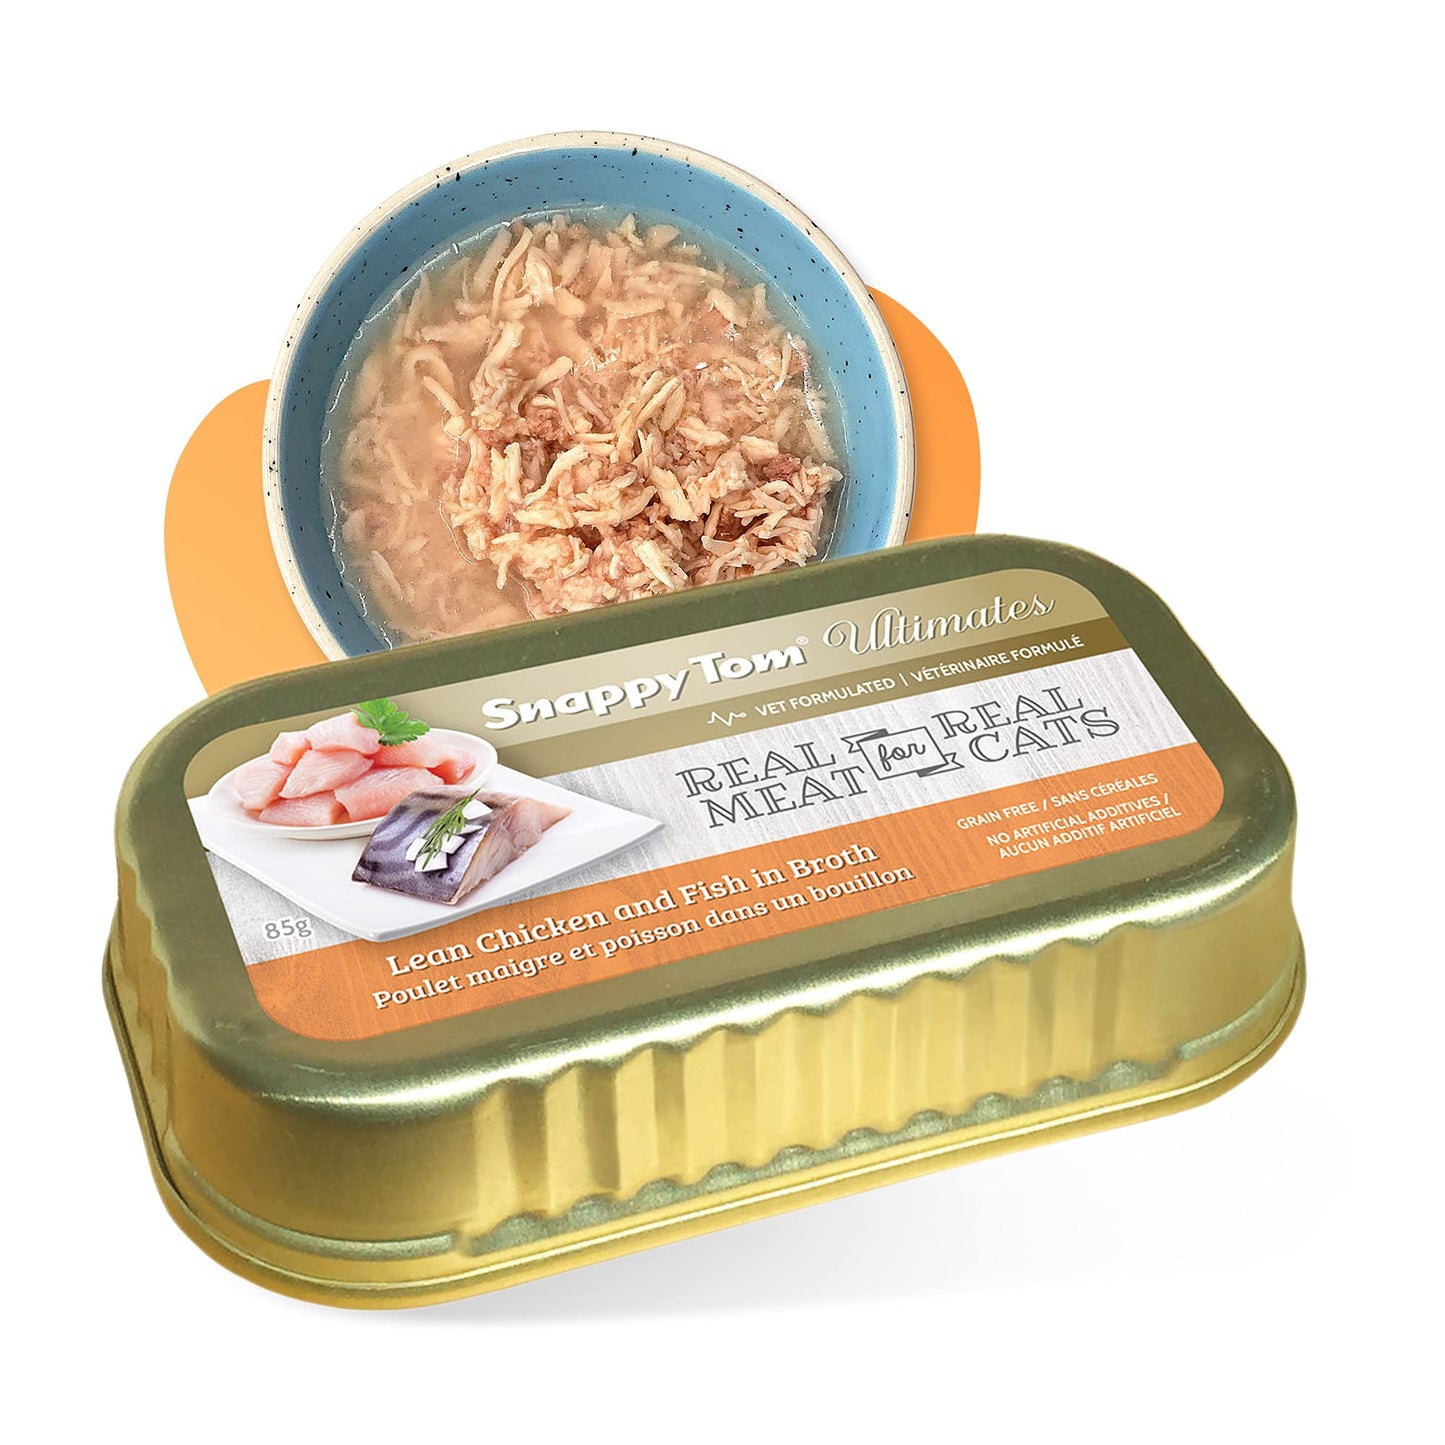 SNAPPY TOM ULTIMATES LEAN CHICKEN & FISH IN BROTH WET CAT FOOD